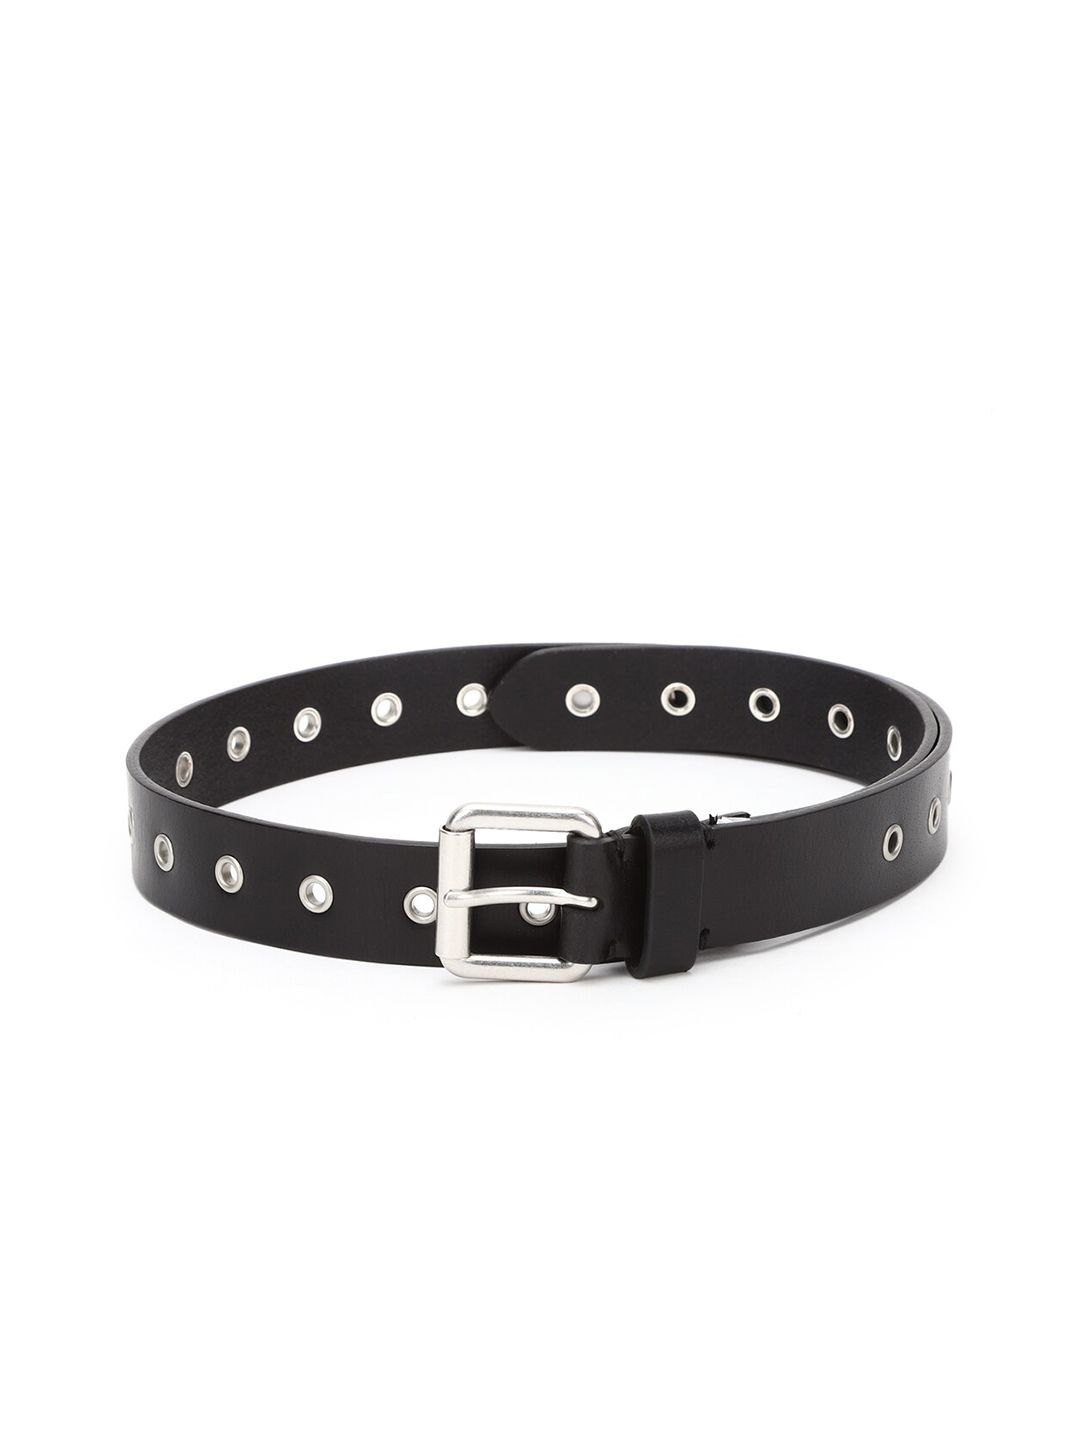 AMERICAN EAGLE OUTFITTERS Women Black Leather Belt Price in India